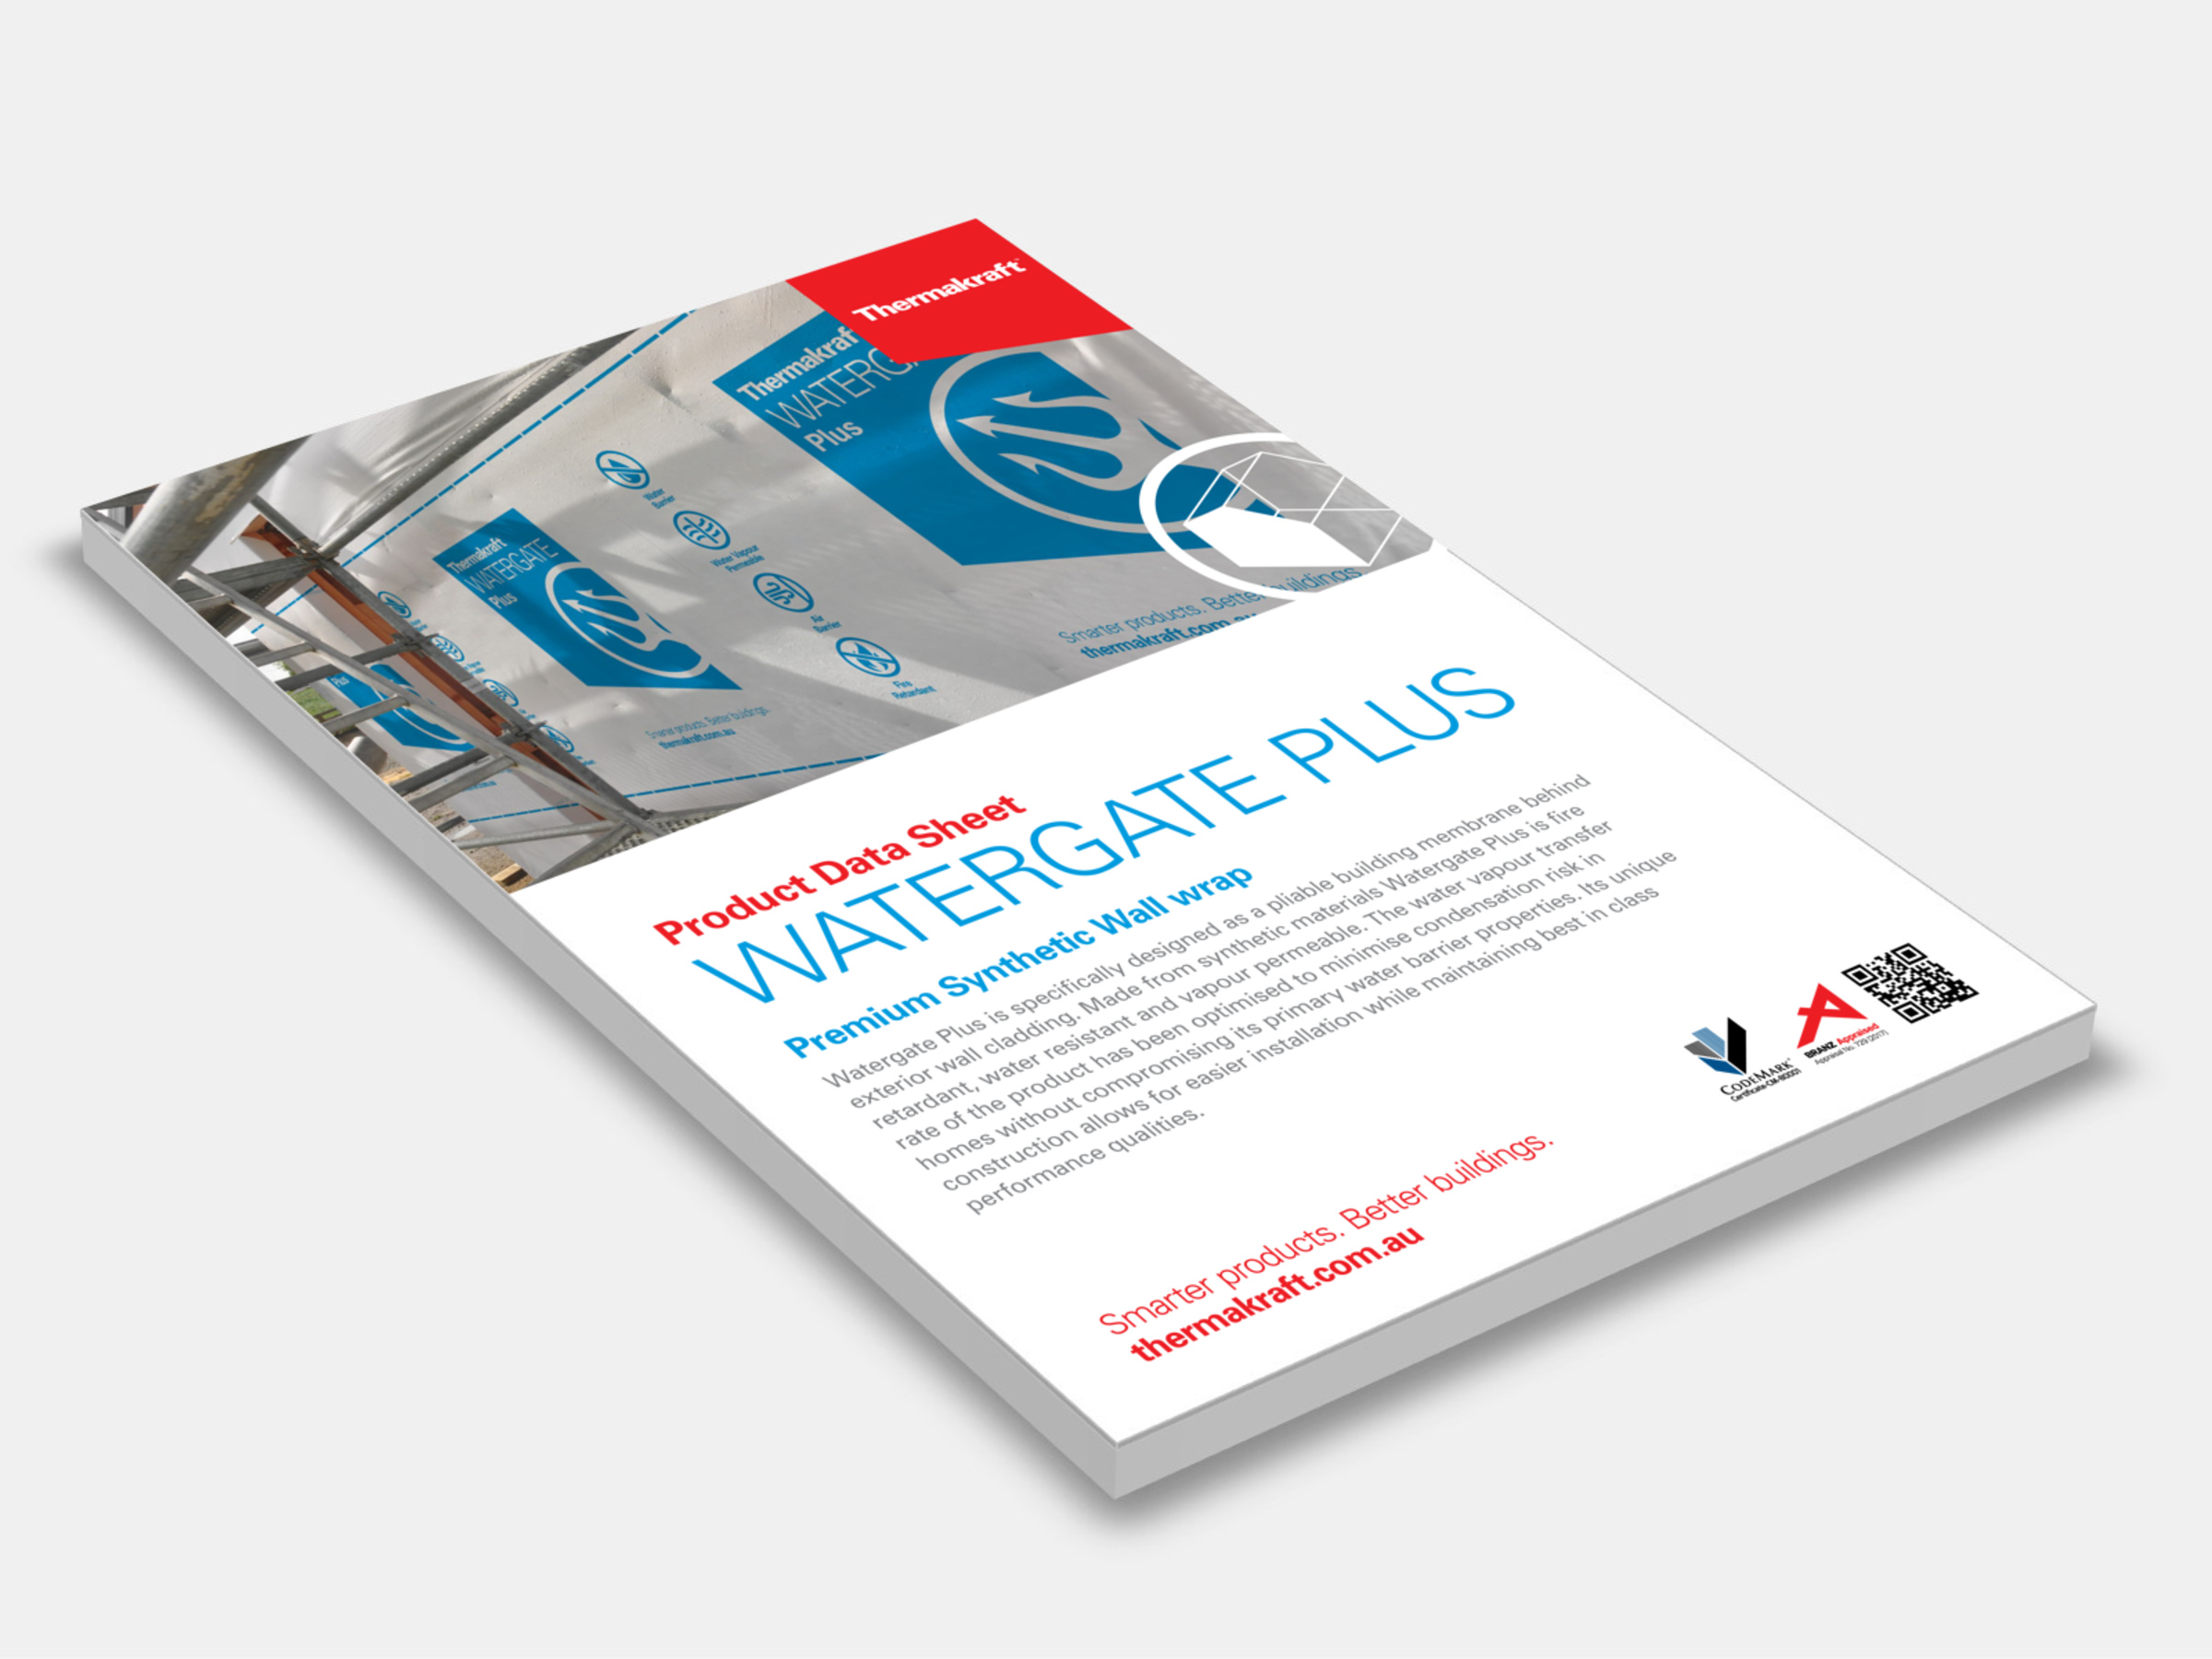 Thermakraft Watergate Plus Product Data Sheet cover 2019